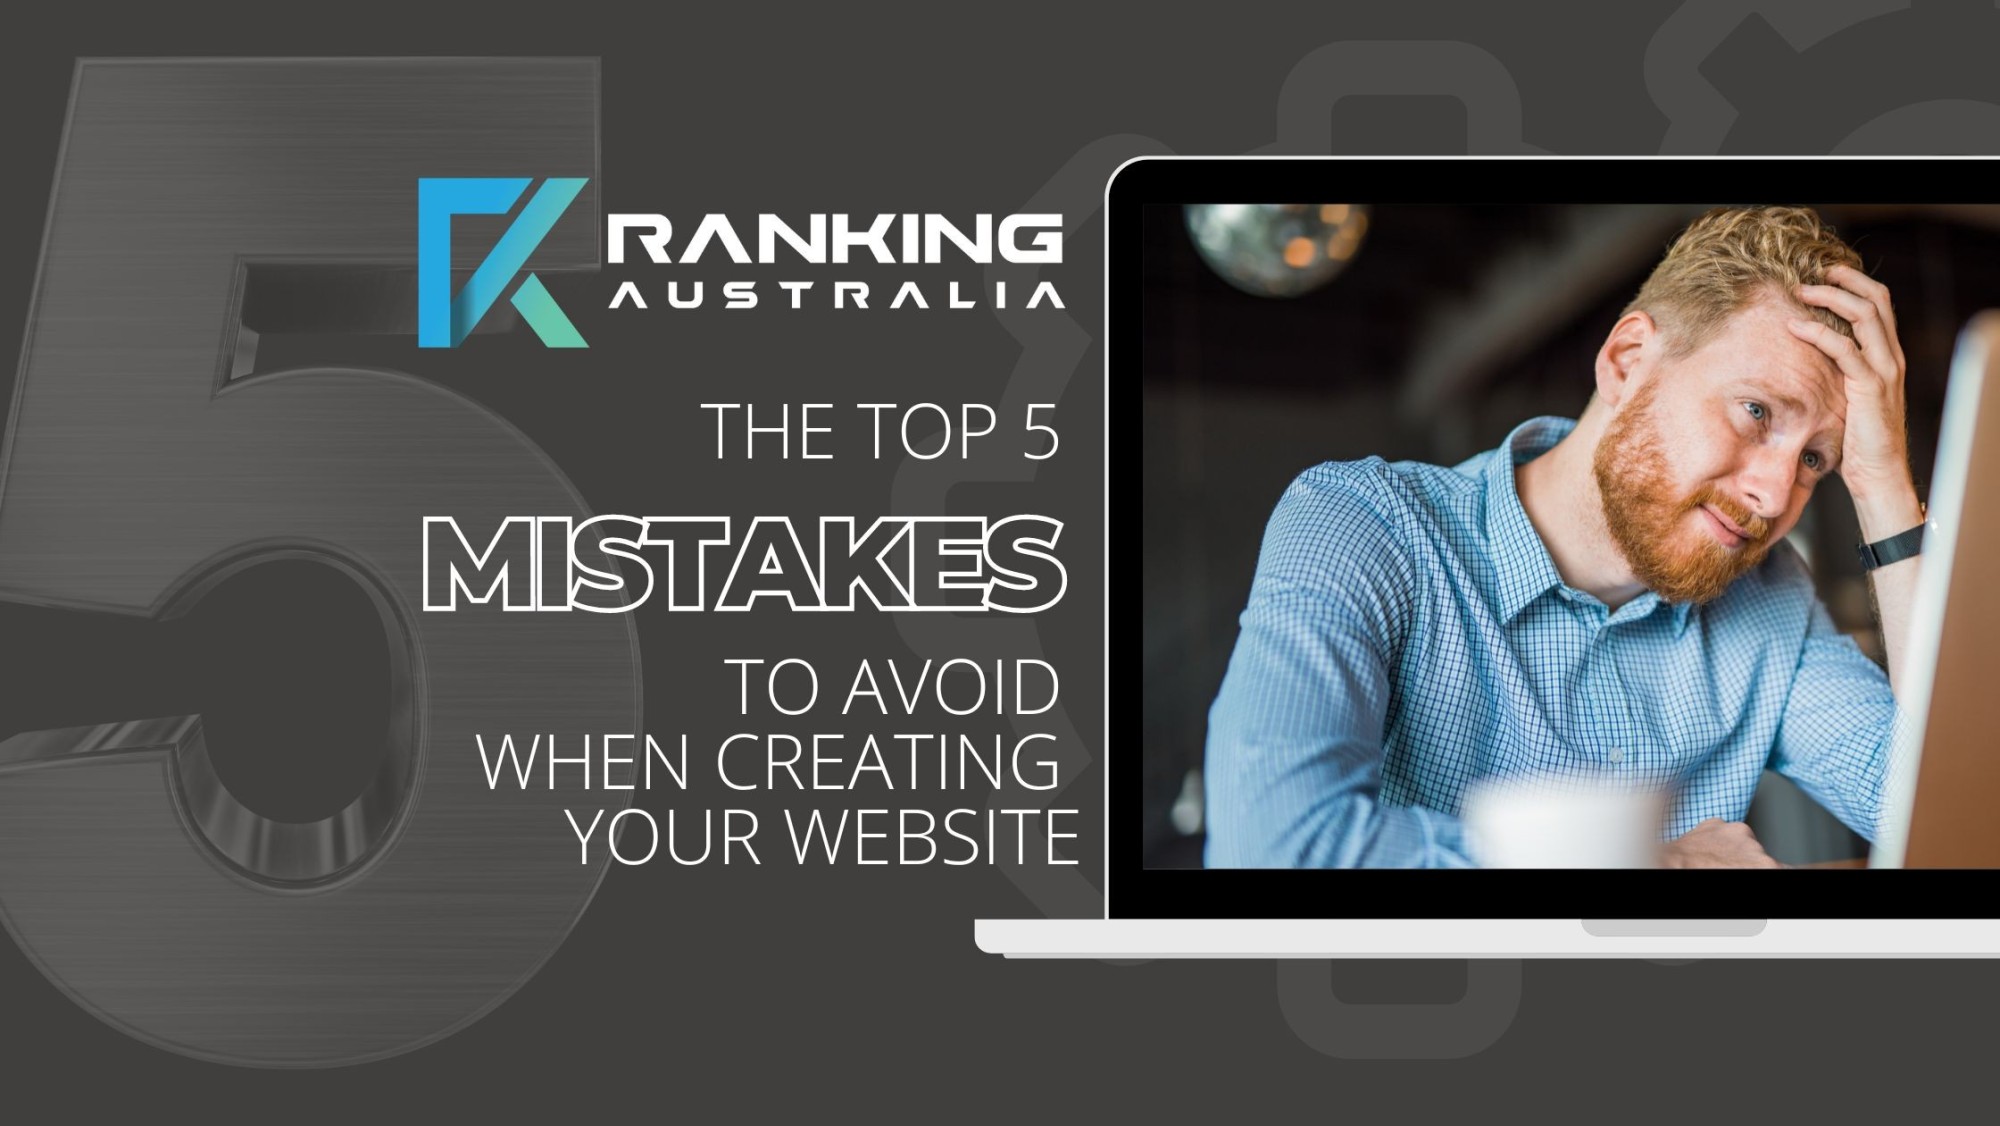 The Top 5 Mistakes to Avoid When Creating Your Website